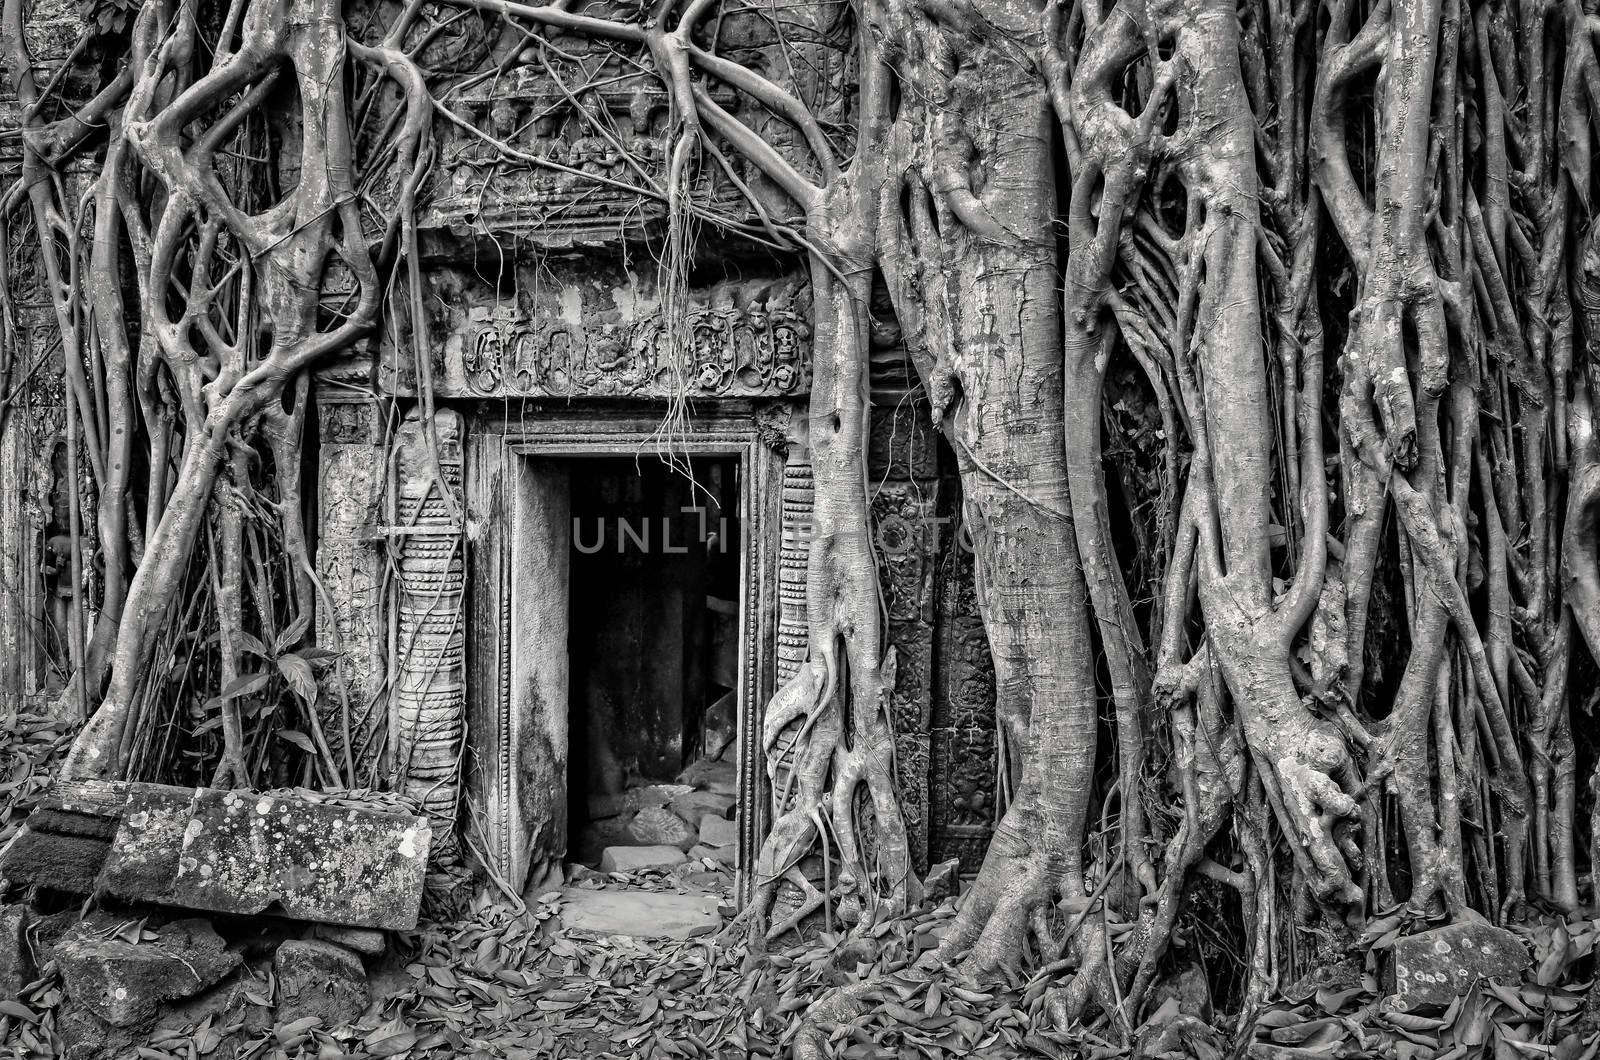 Ancient stone temple door and tree roots - monochrome vintage view, Angkor Wat, Cambodia